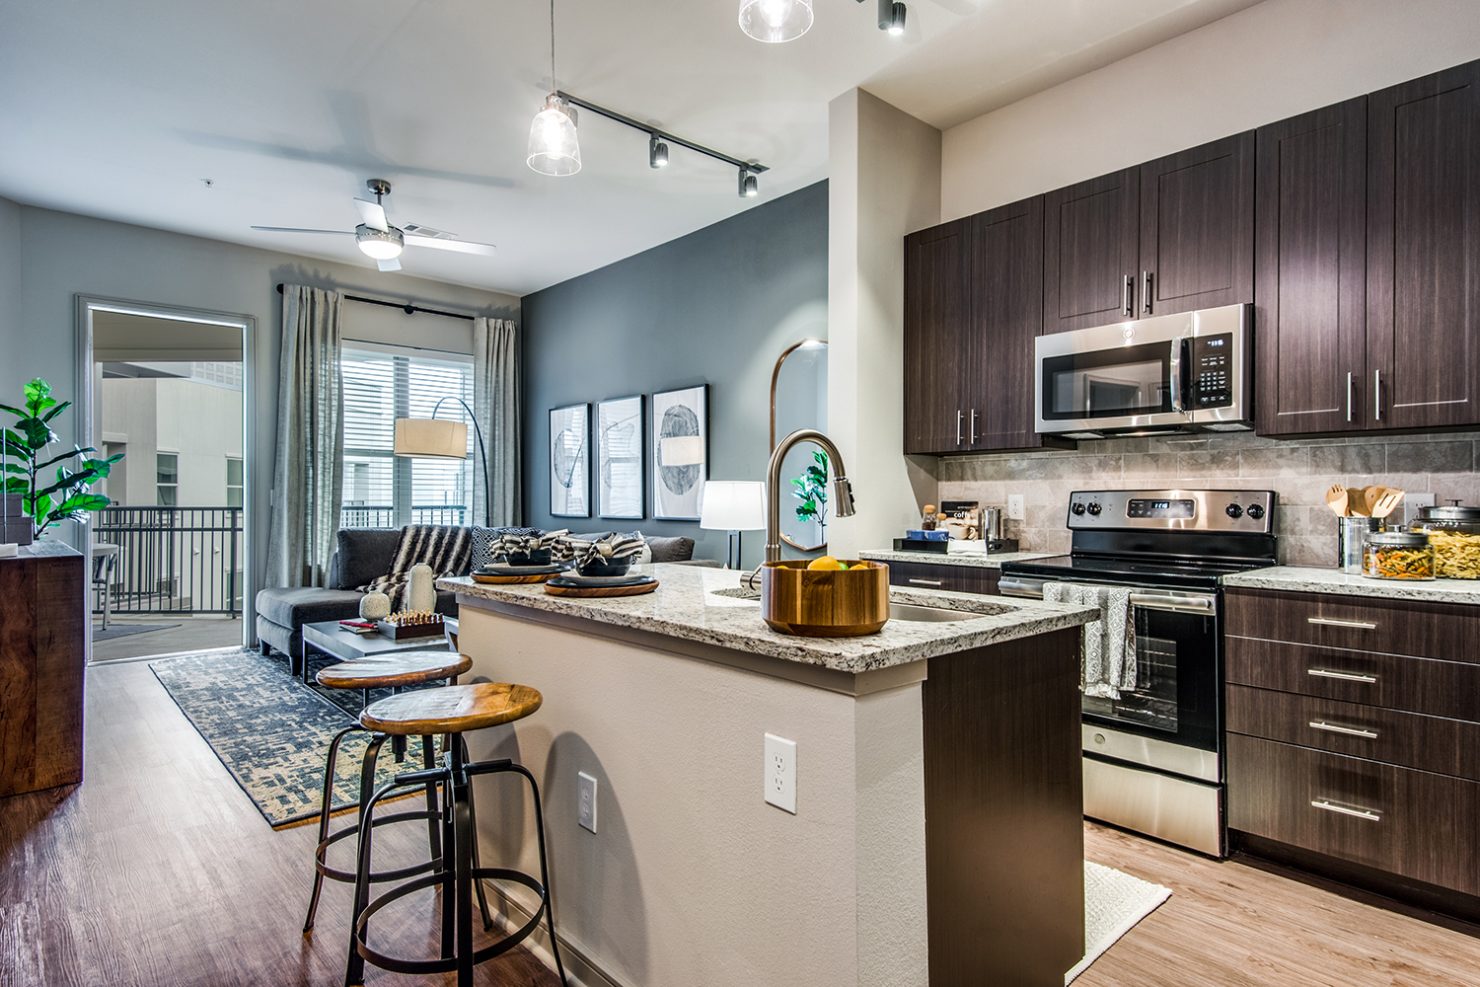 Model apartment kitchen and living area with large island, stainless steel appliances, wood-style flooring, and access to patio or balcony